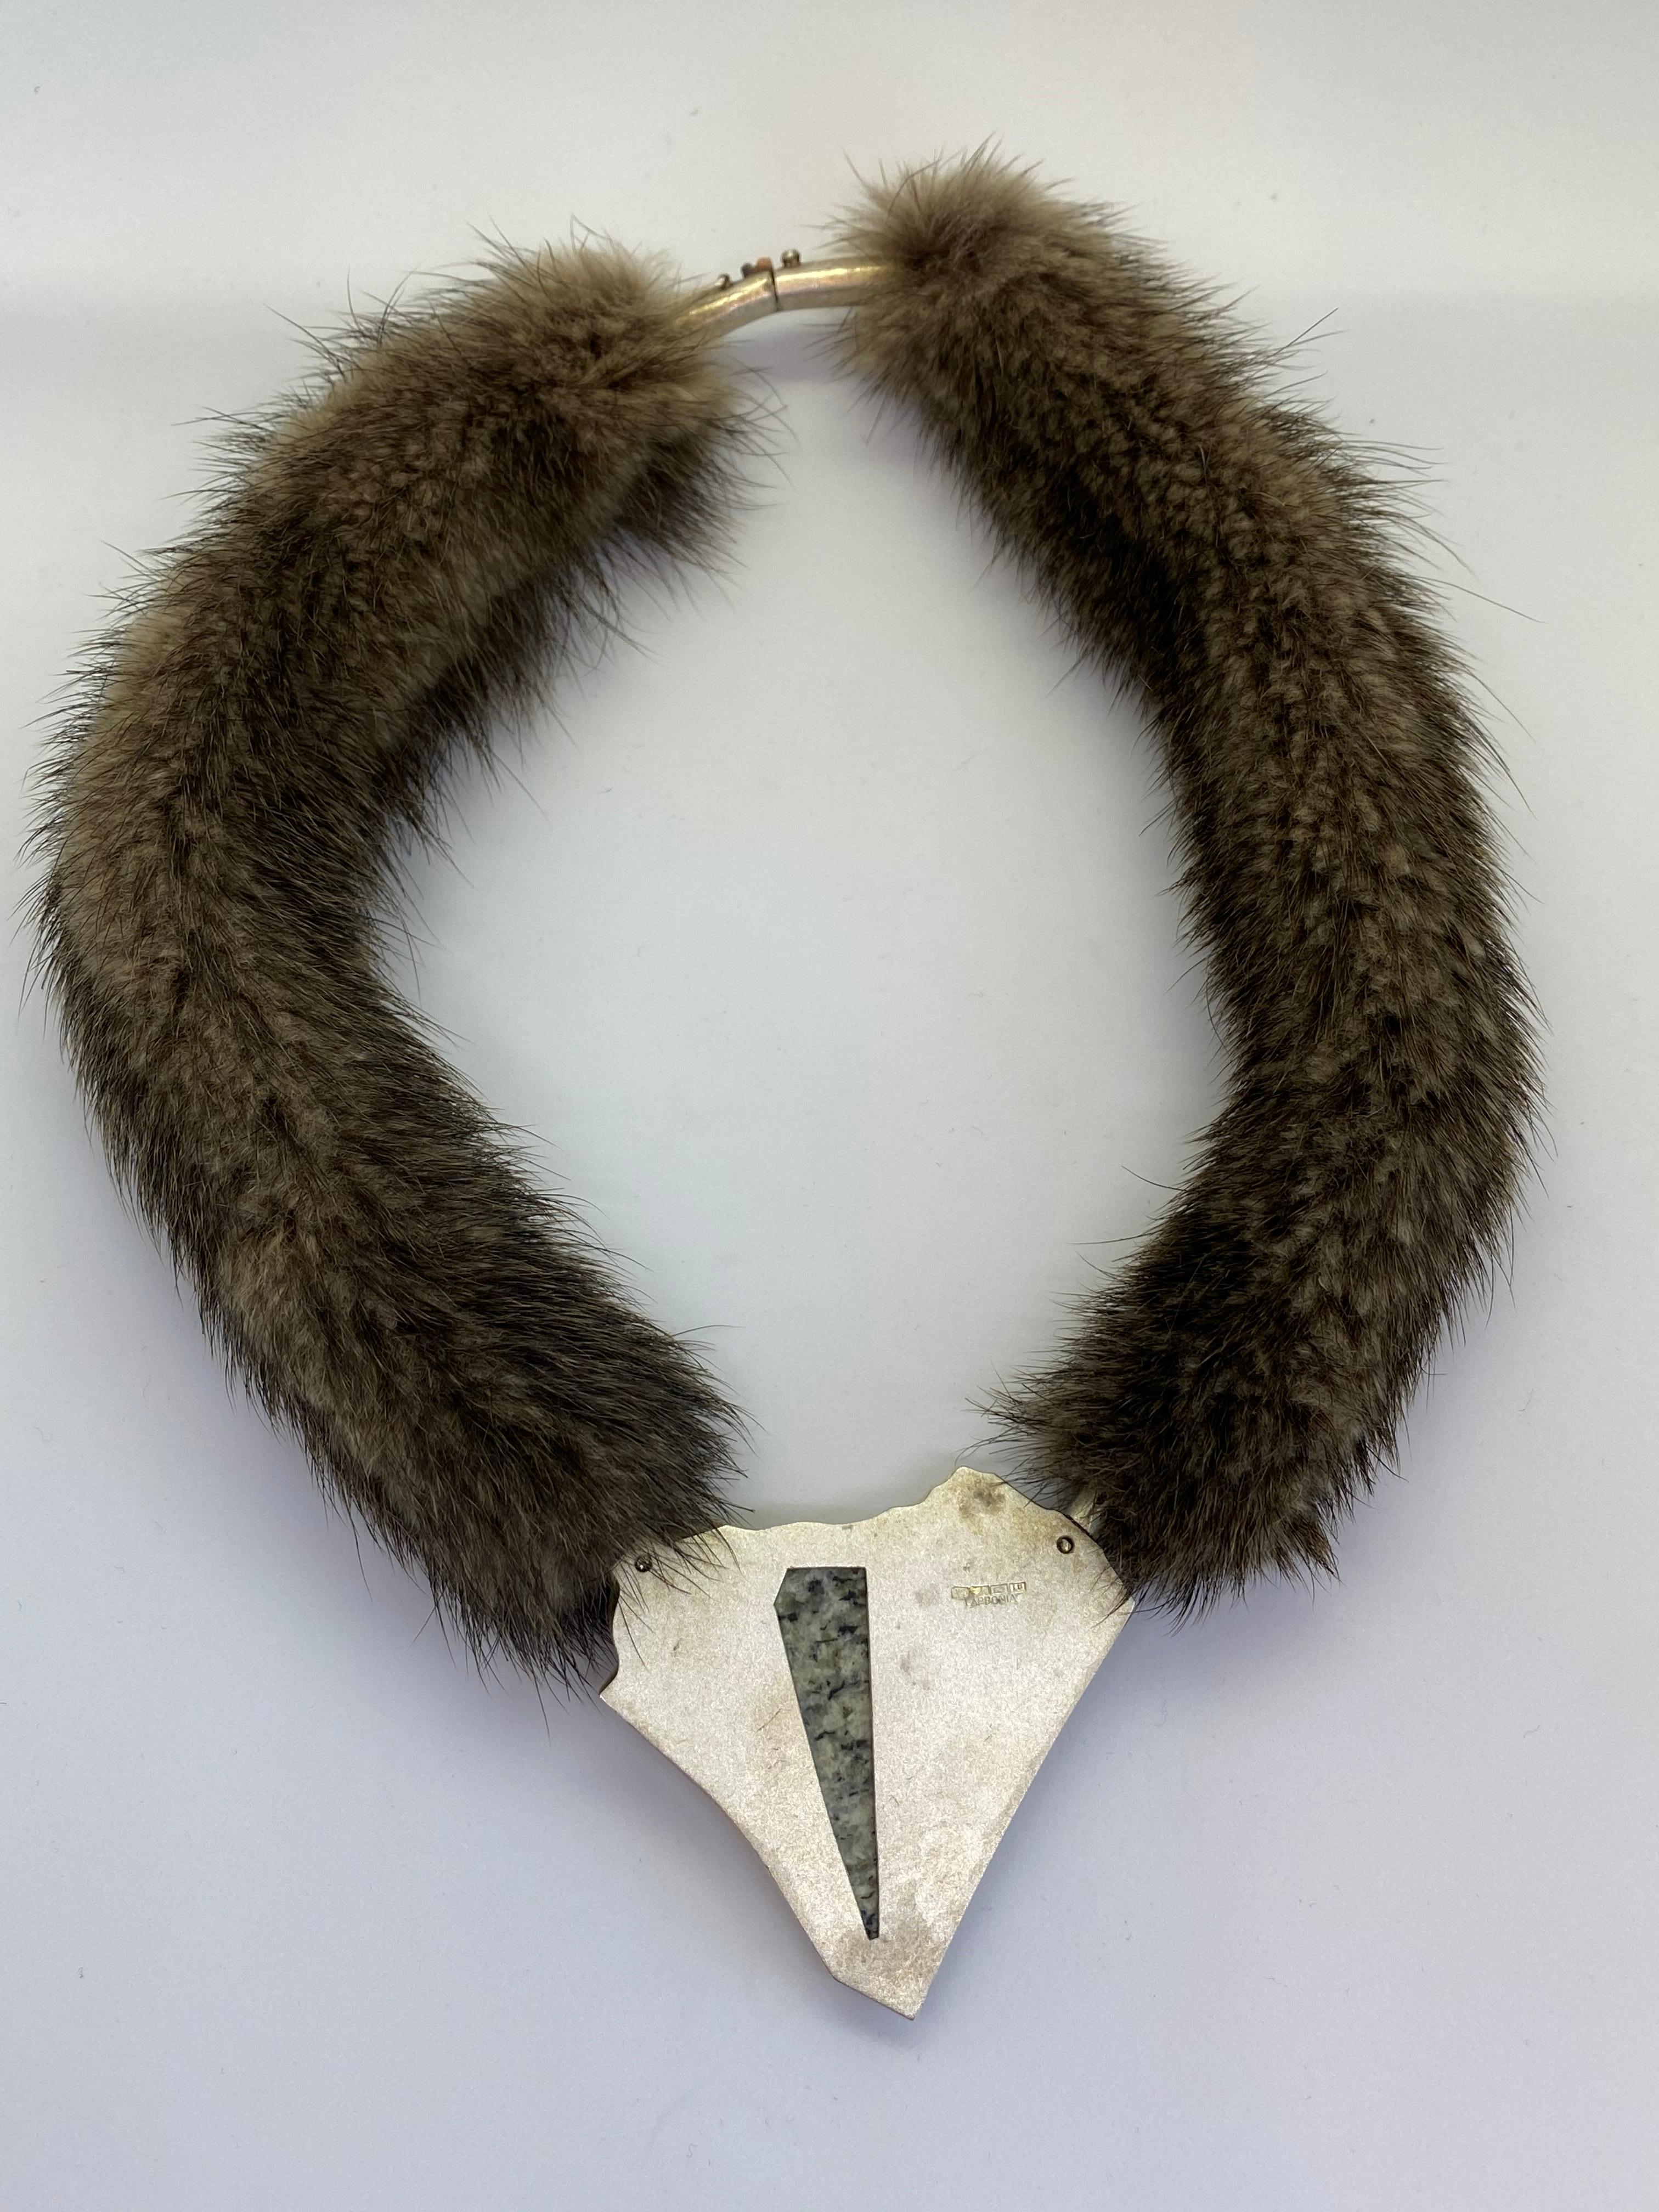 Silver 925 Granite Mink Björn Weckström Lapponia Destino Necklace
Helsinki Finland 1998

The man and his myths
The artistic walk of life of sculptor Bjorn Weckstrom is characterised by very impressive series of work, shaped in materials such as